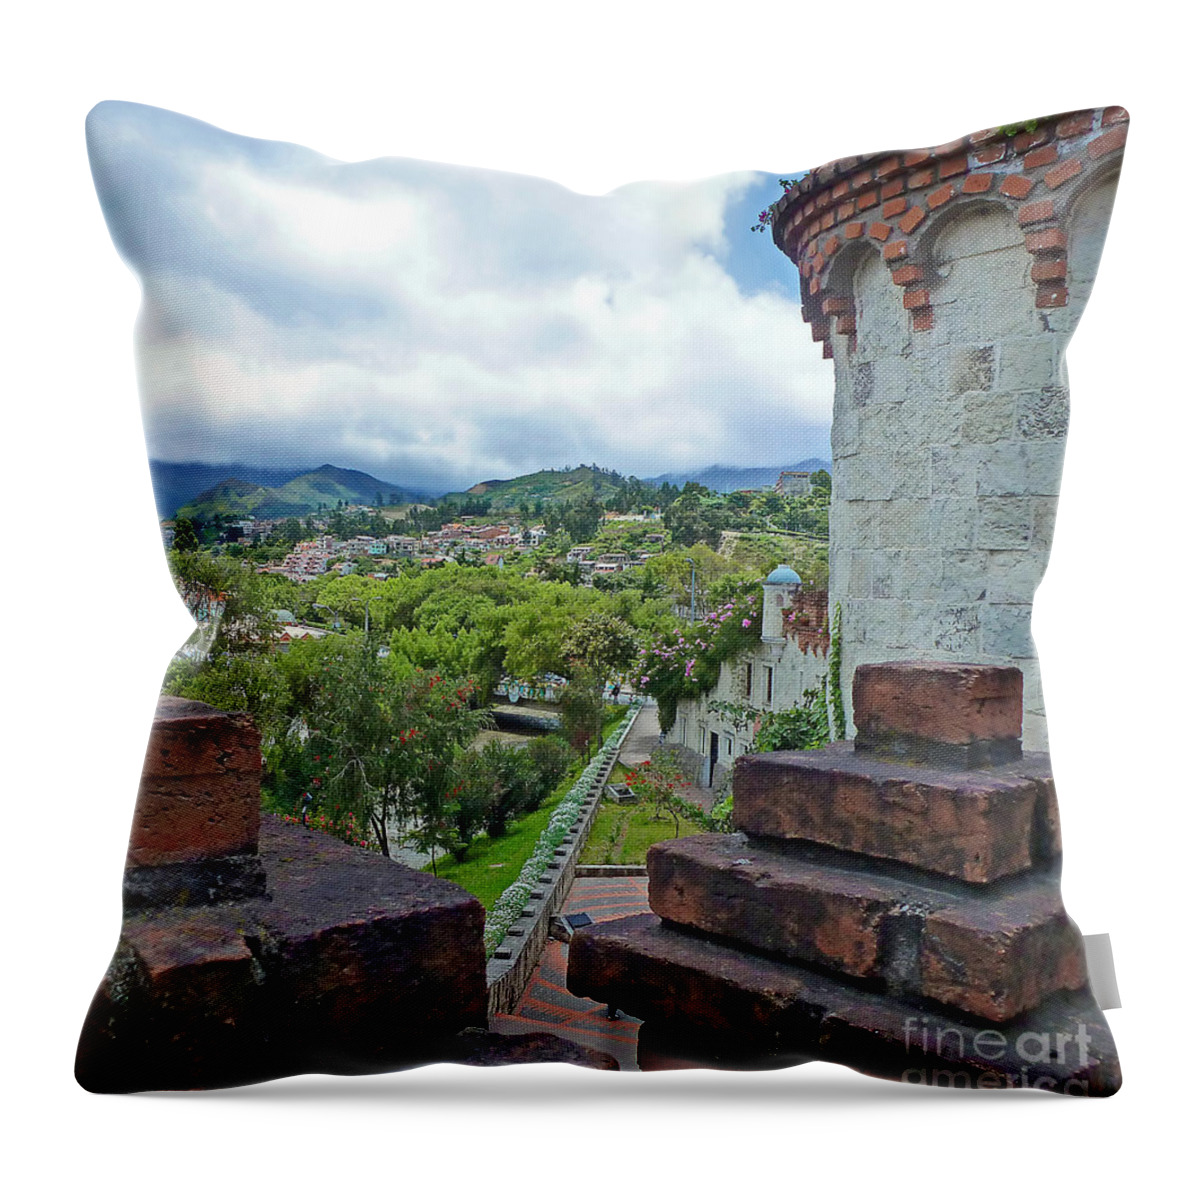 Loja Throw Pillow featuring the photograph View from the city walls - Loja - Ecuador by Julia Springer